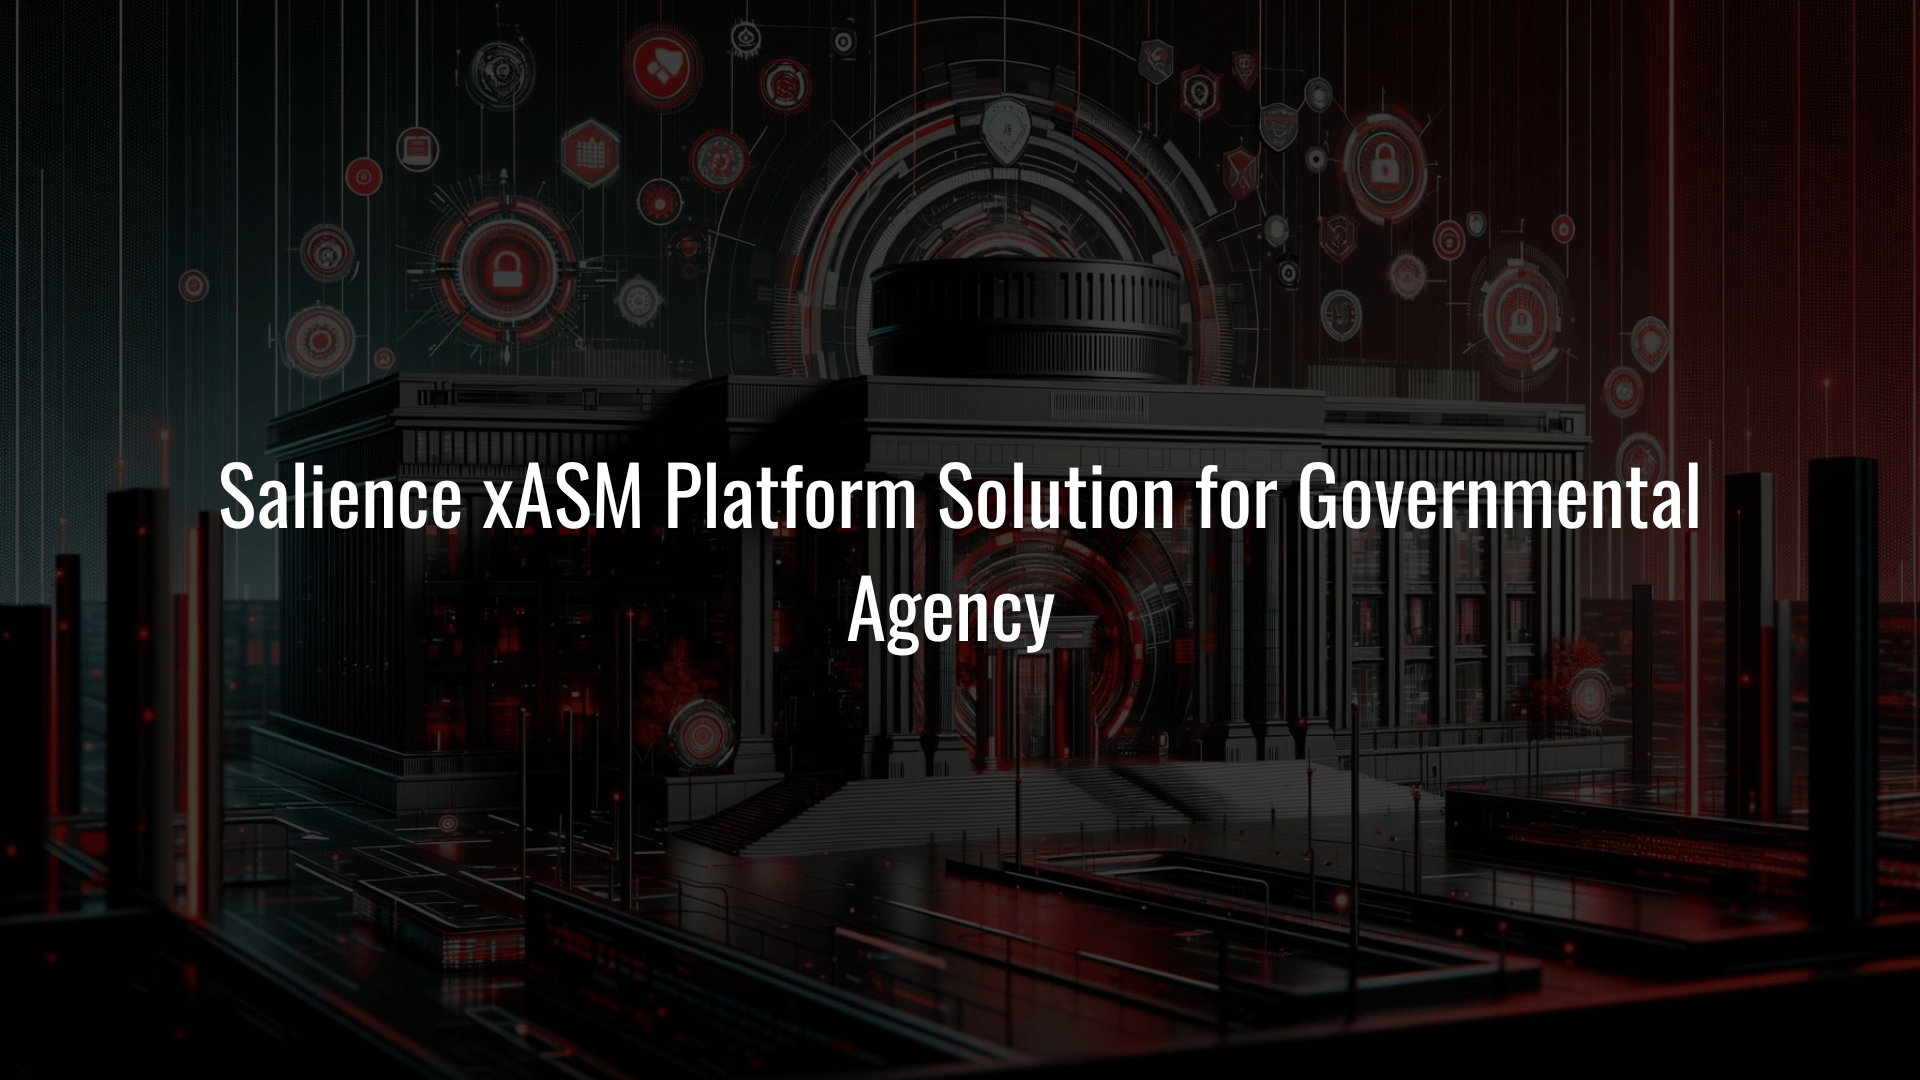 Salience xASM Platform Solution for Governmental Agency